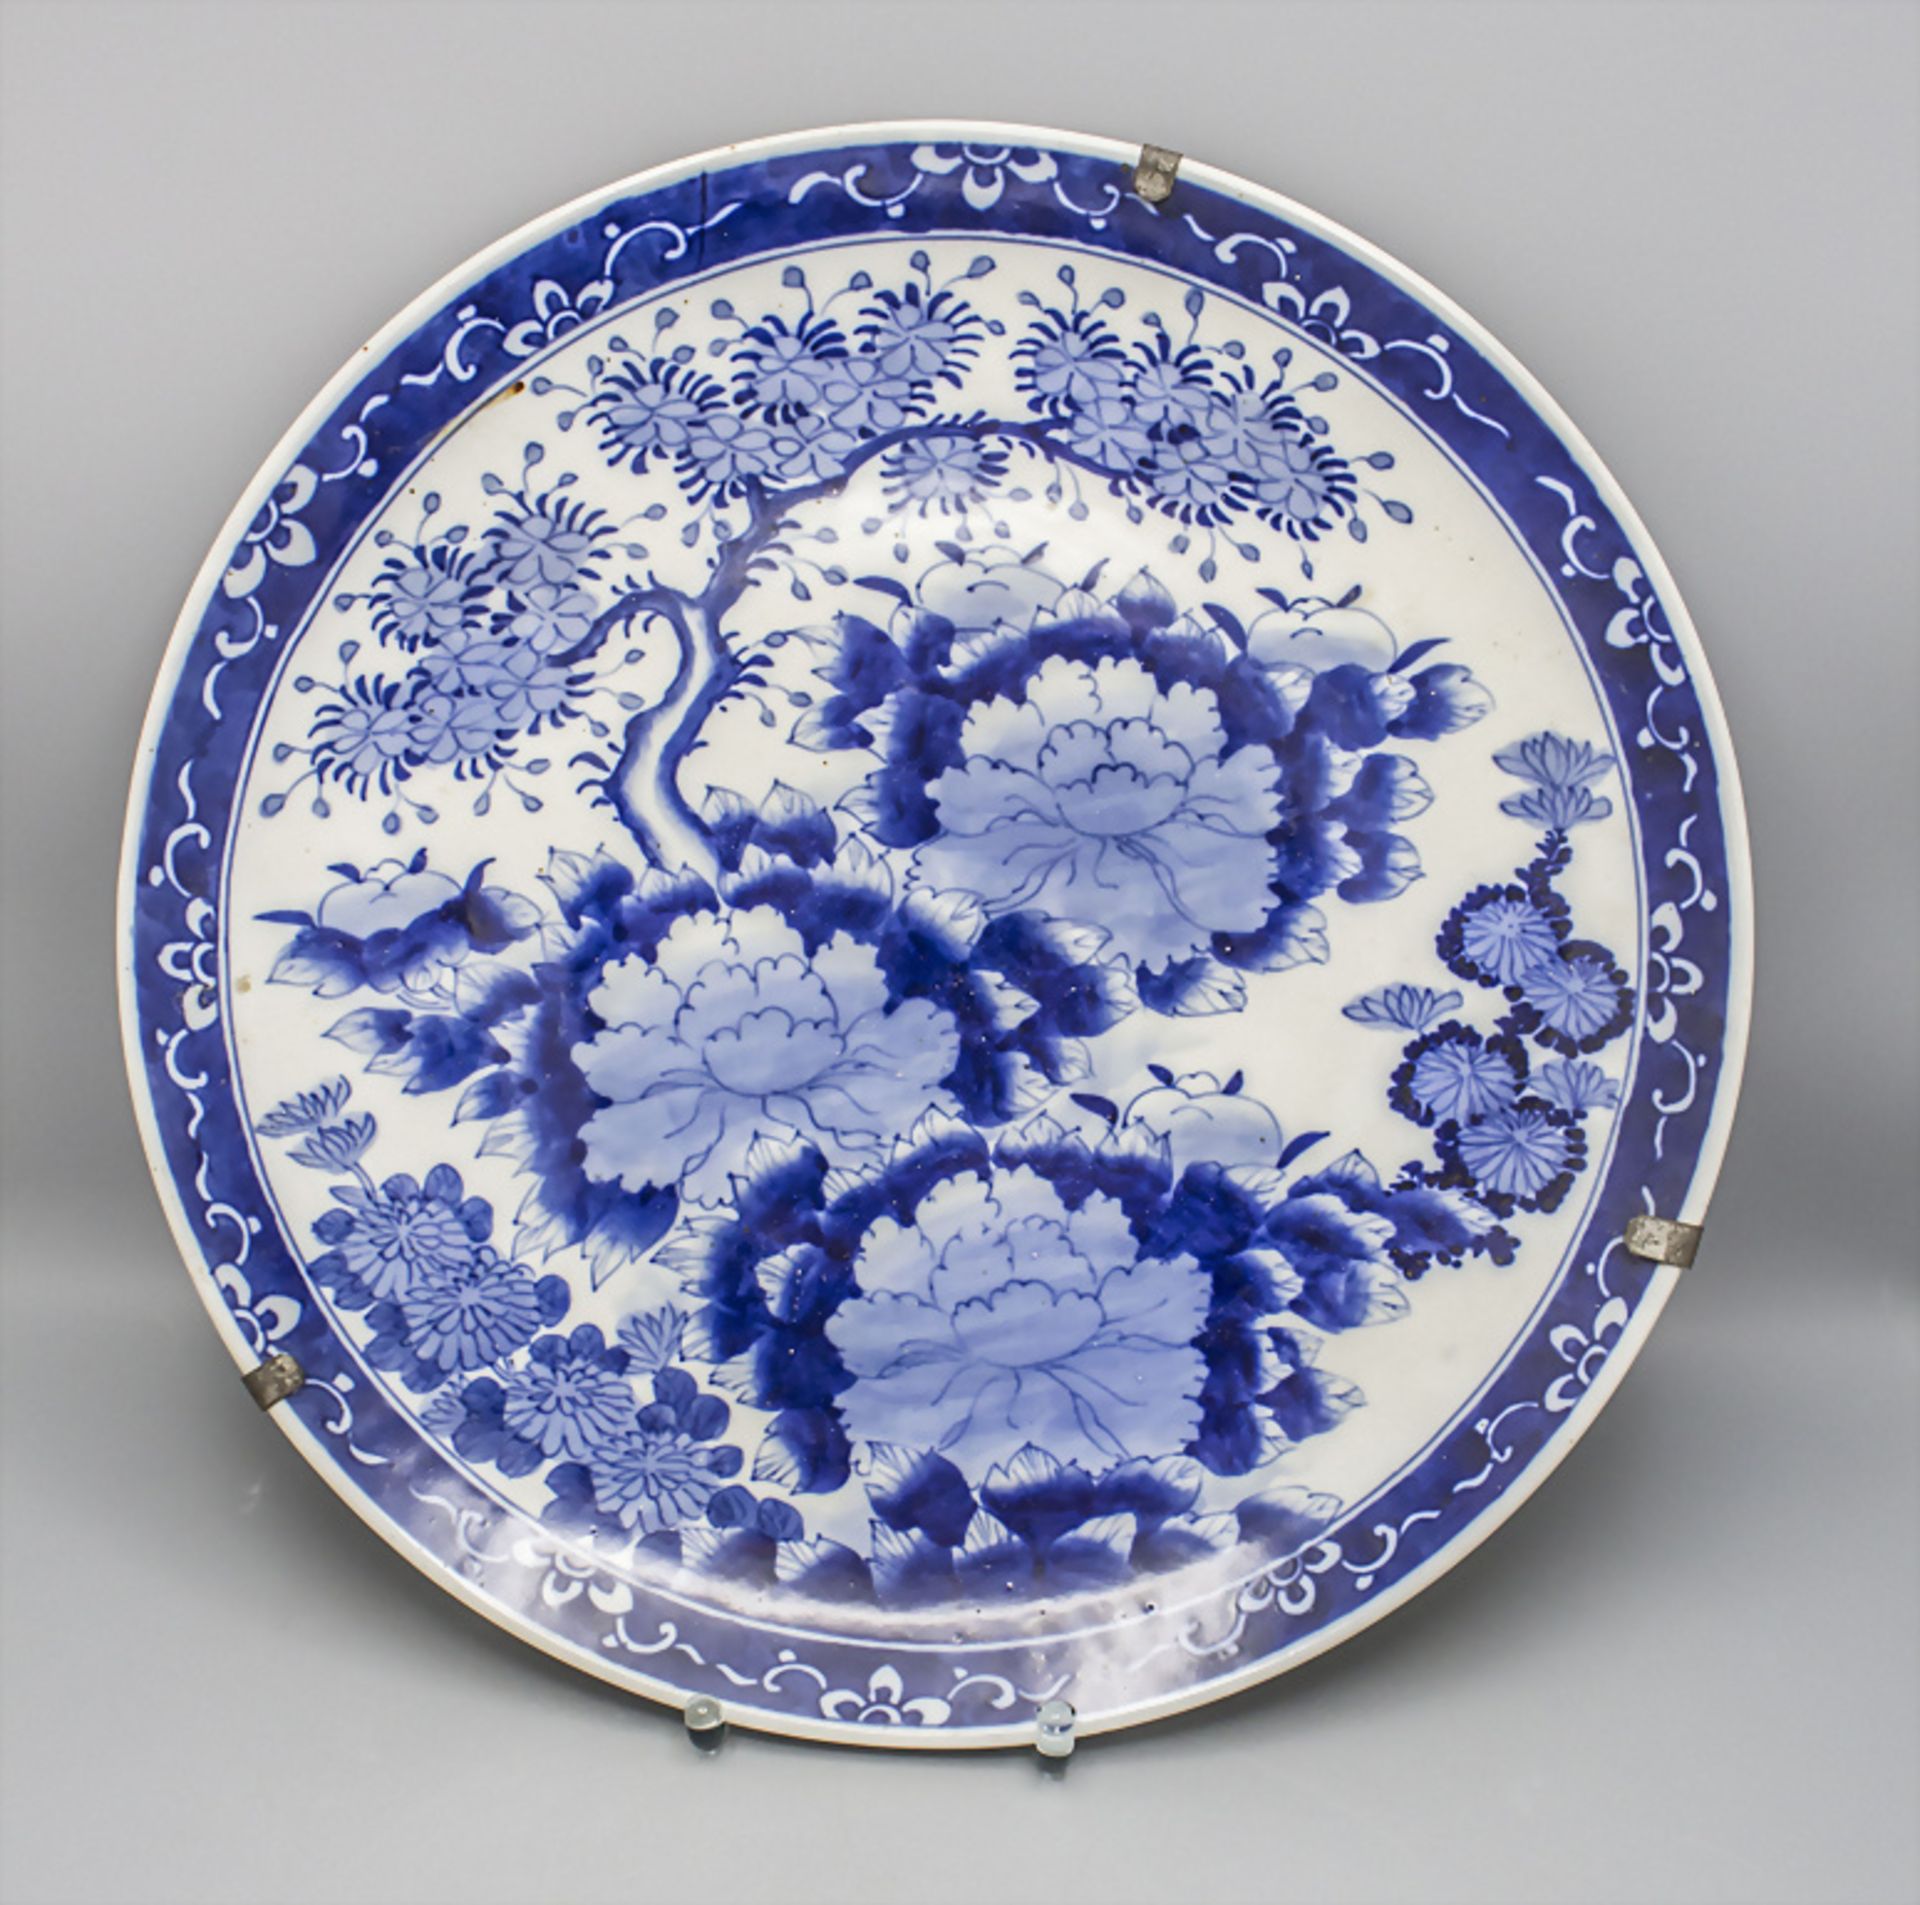 Großer Teller / A large plate, wohl China 18. Jh.